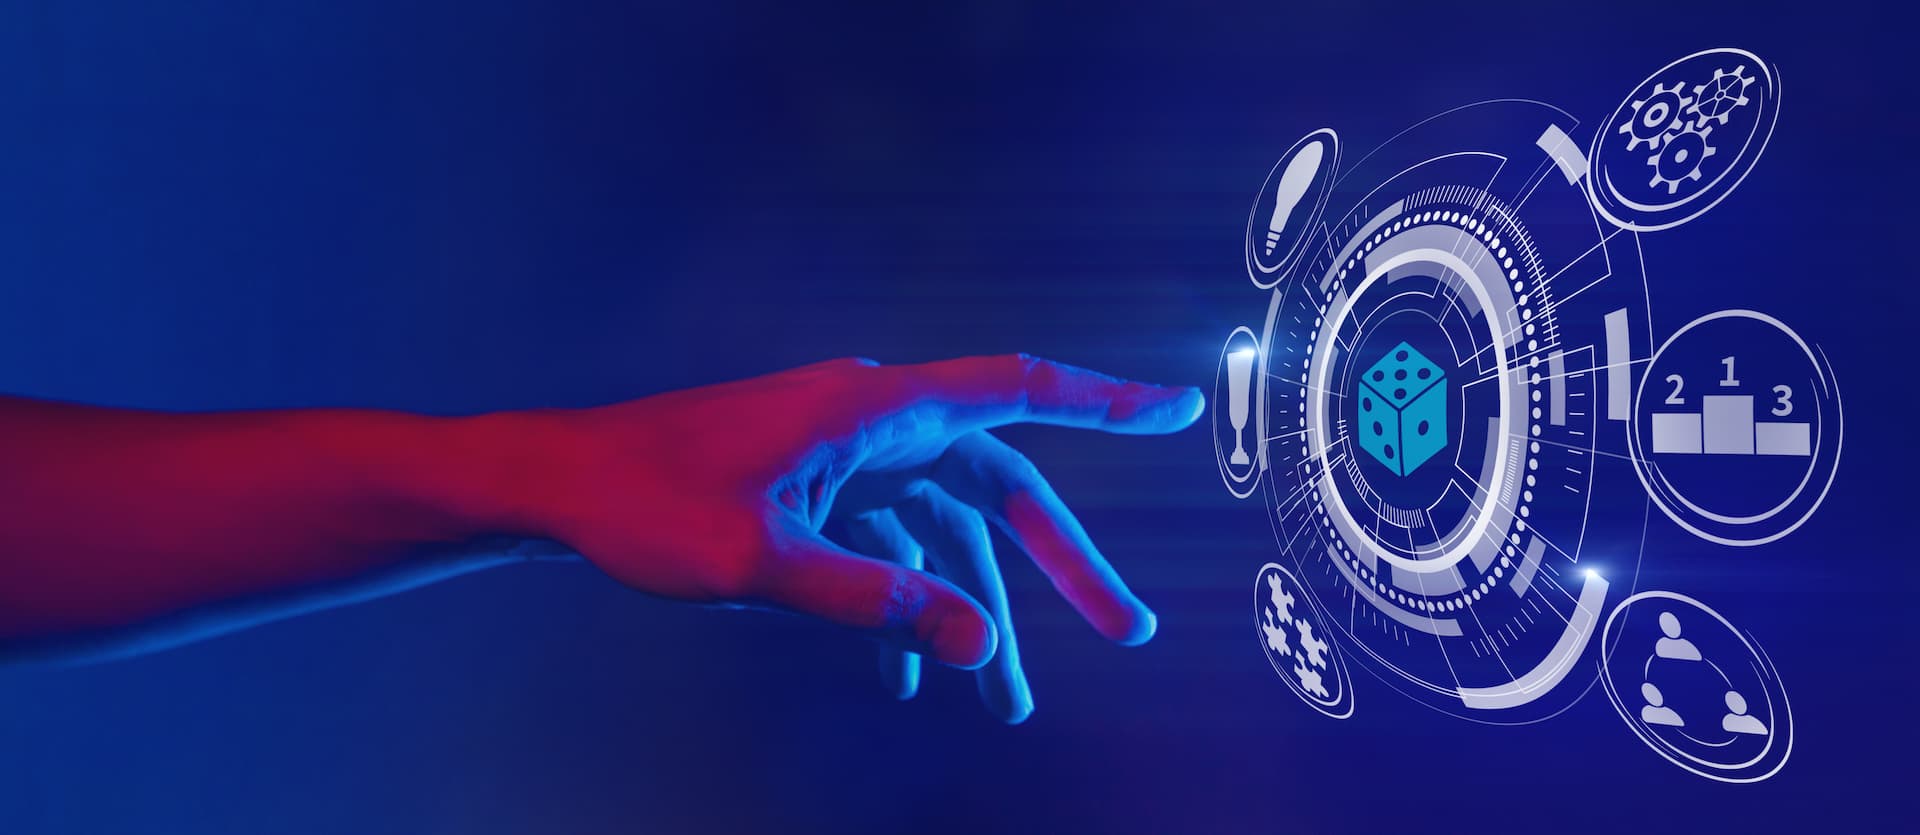 gamification and gaming technology illustration in neon style, hand touching dice icon